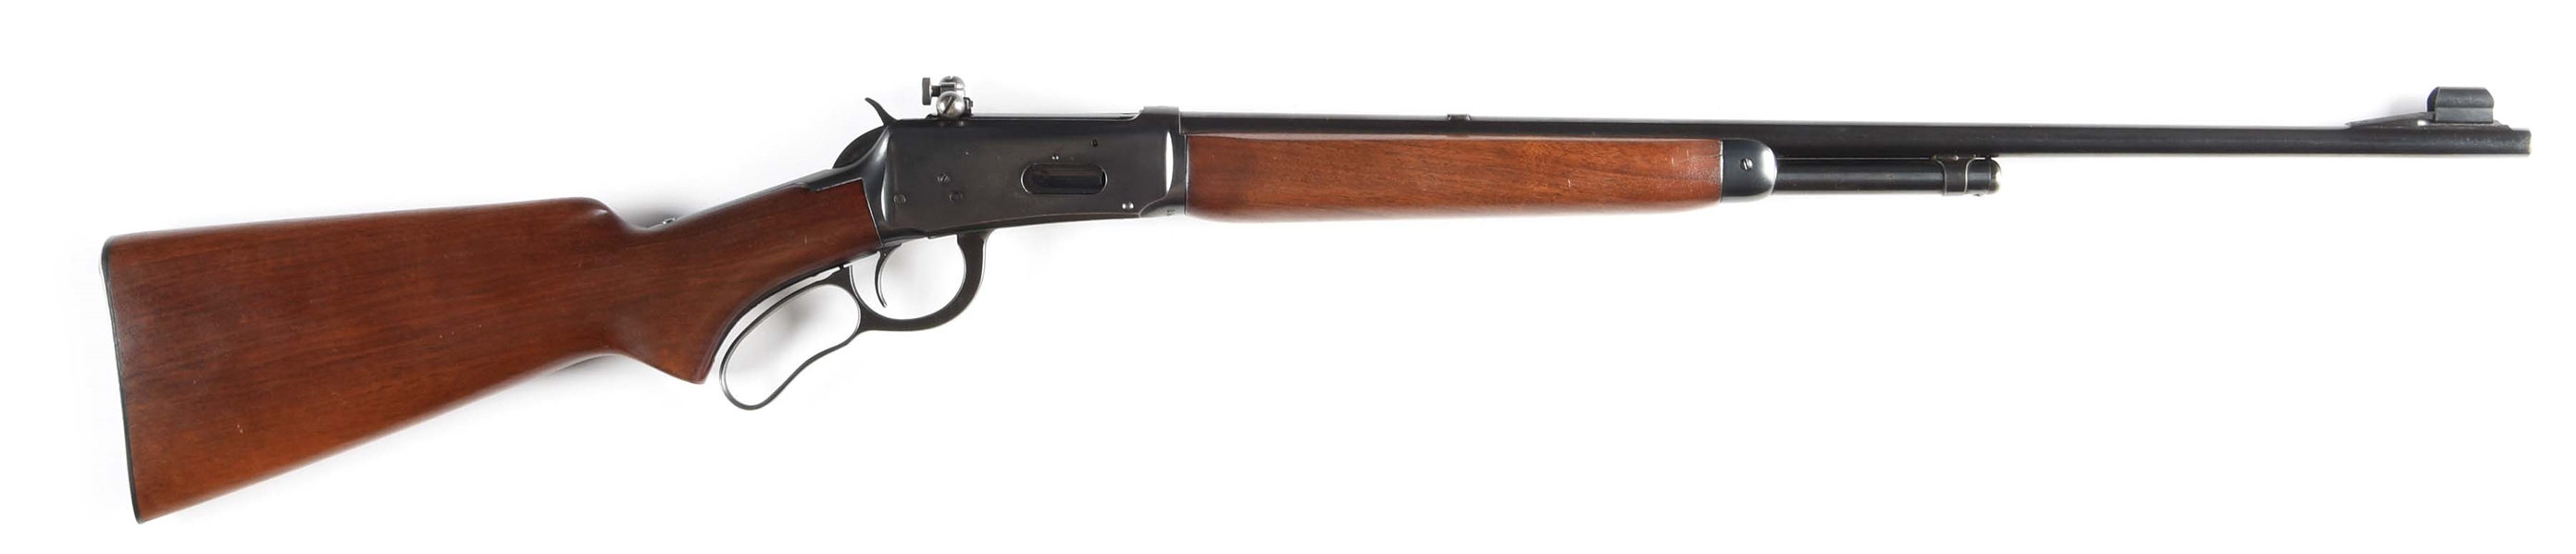 (C) WINCHESTER MODEL 64 LEVER ACTION RIFLE (1952).